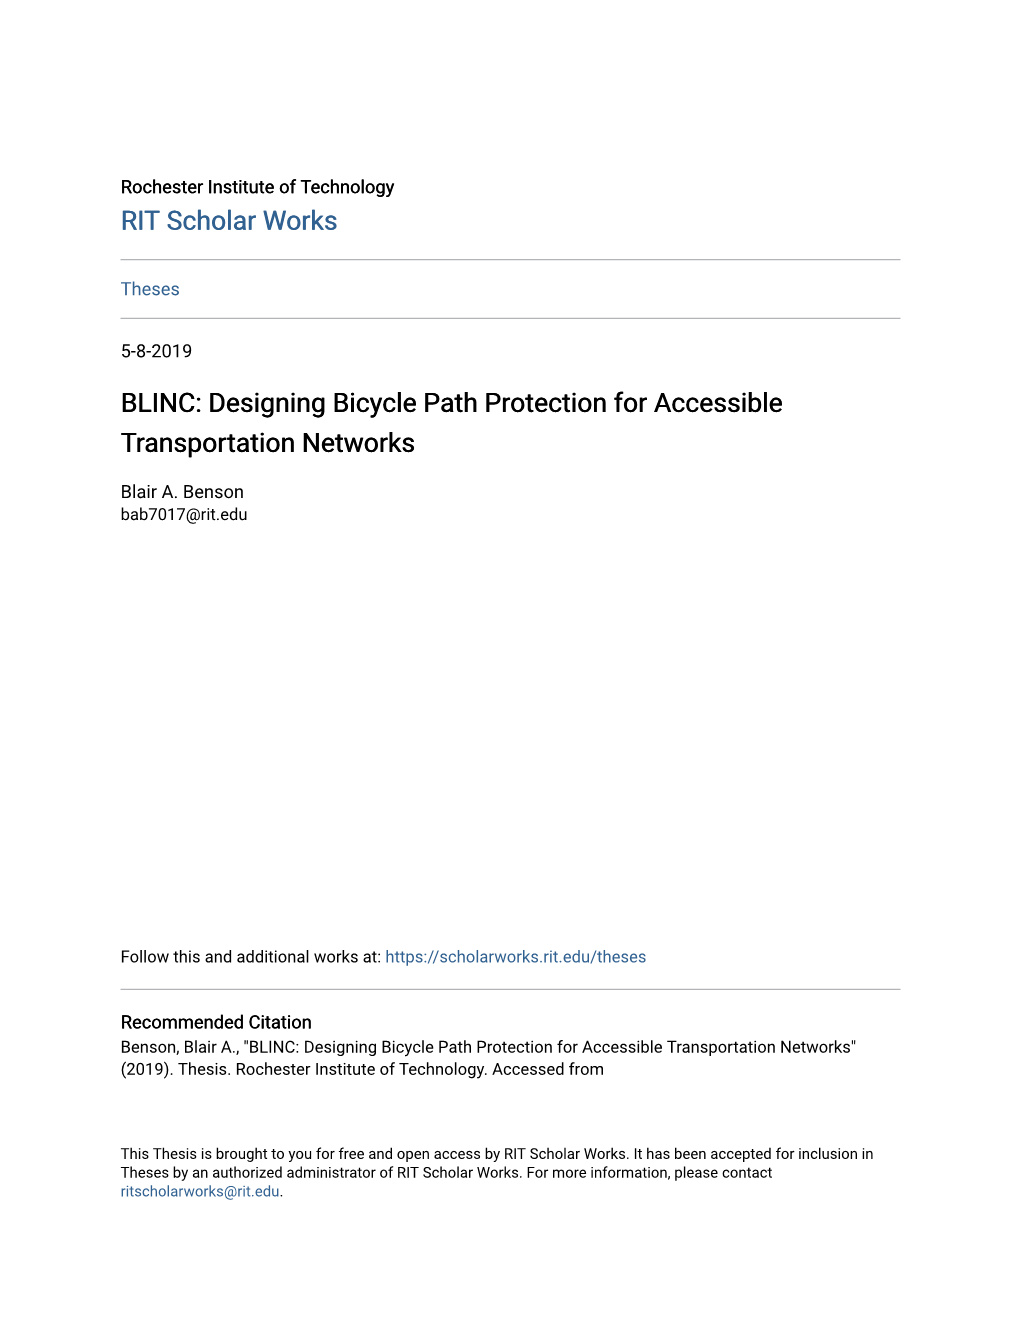 Designing Bicycle Path Protection for Accessible Transportation Networks